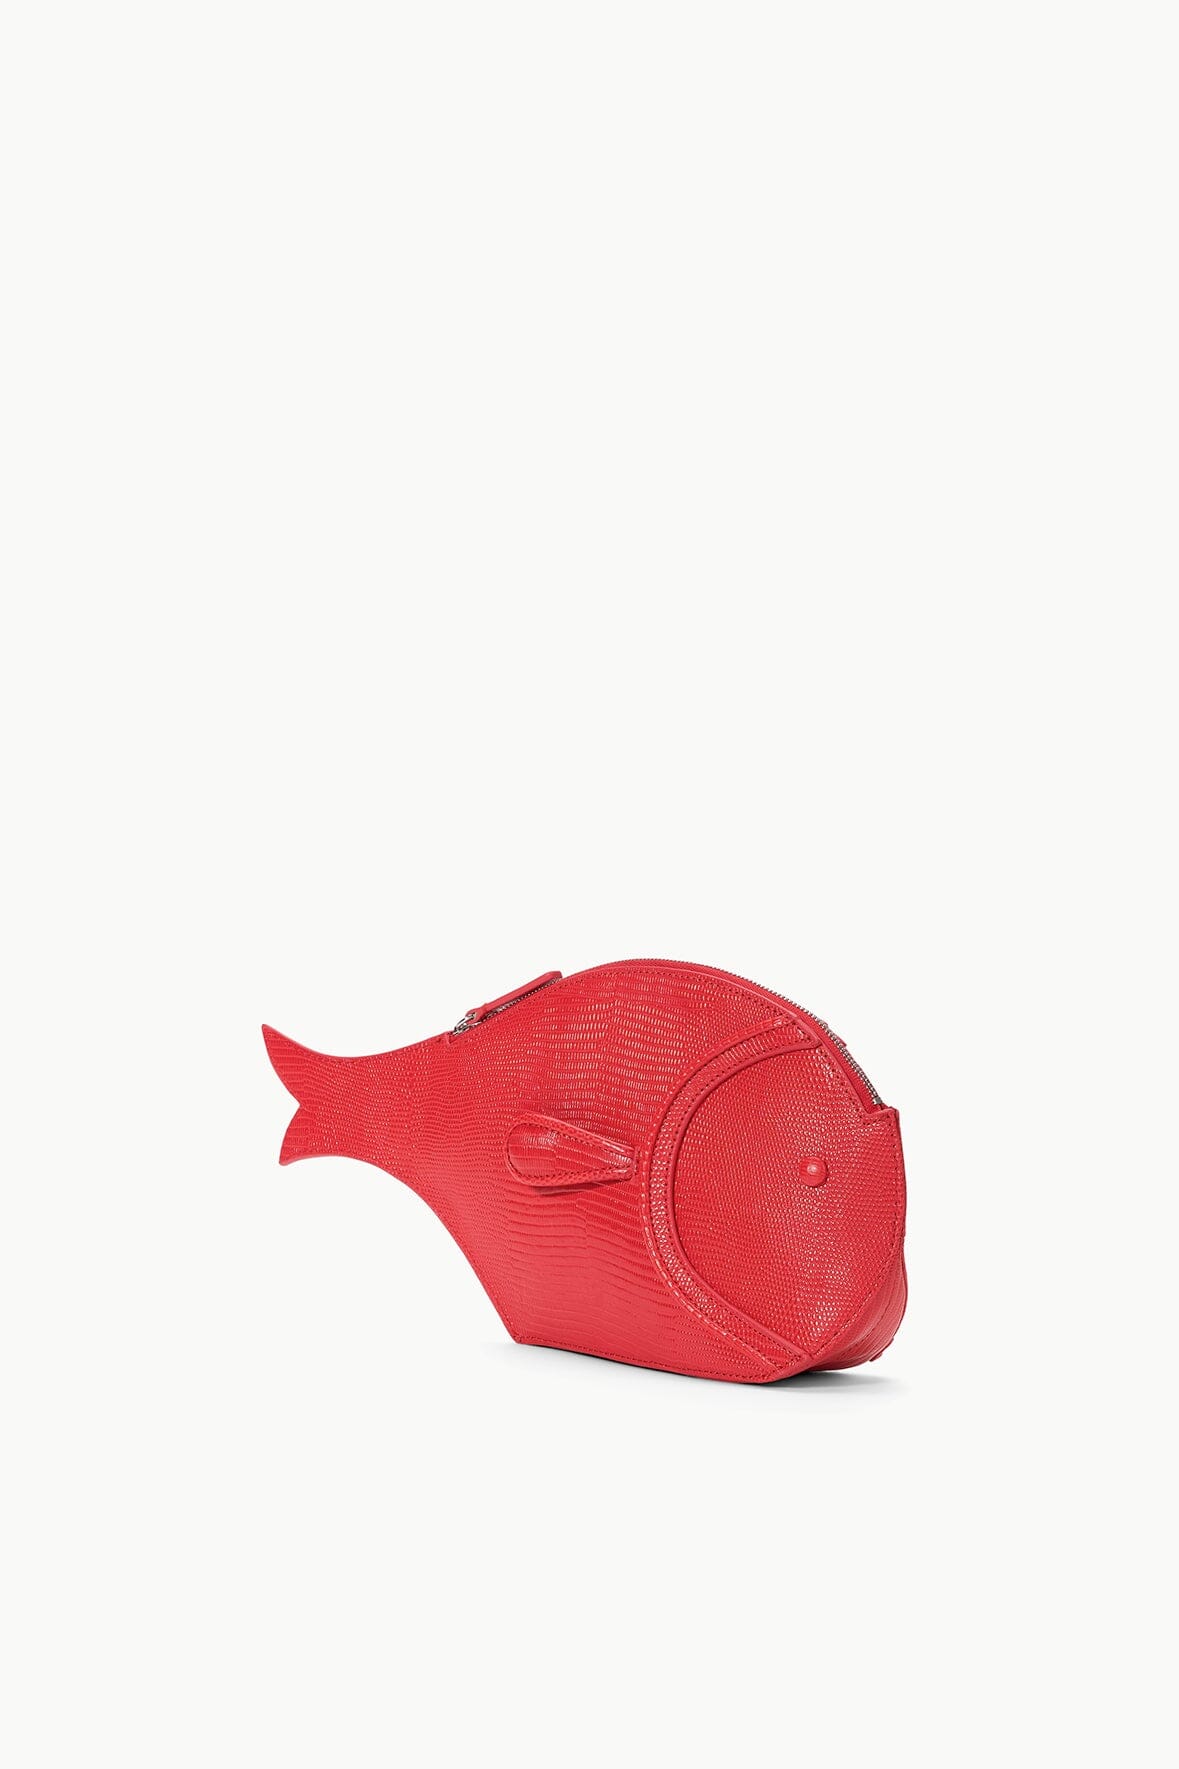 Pesce Leather Clutch - Red Rose